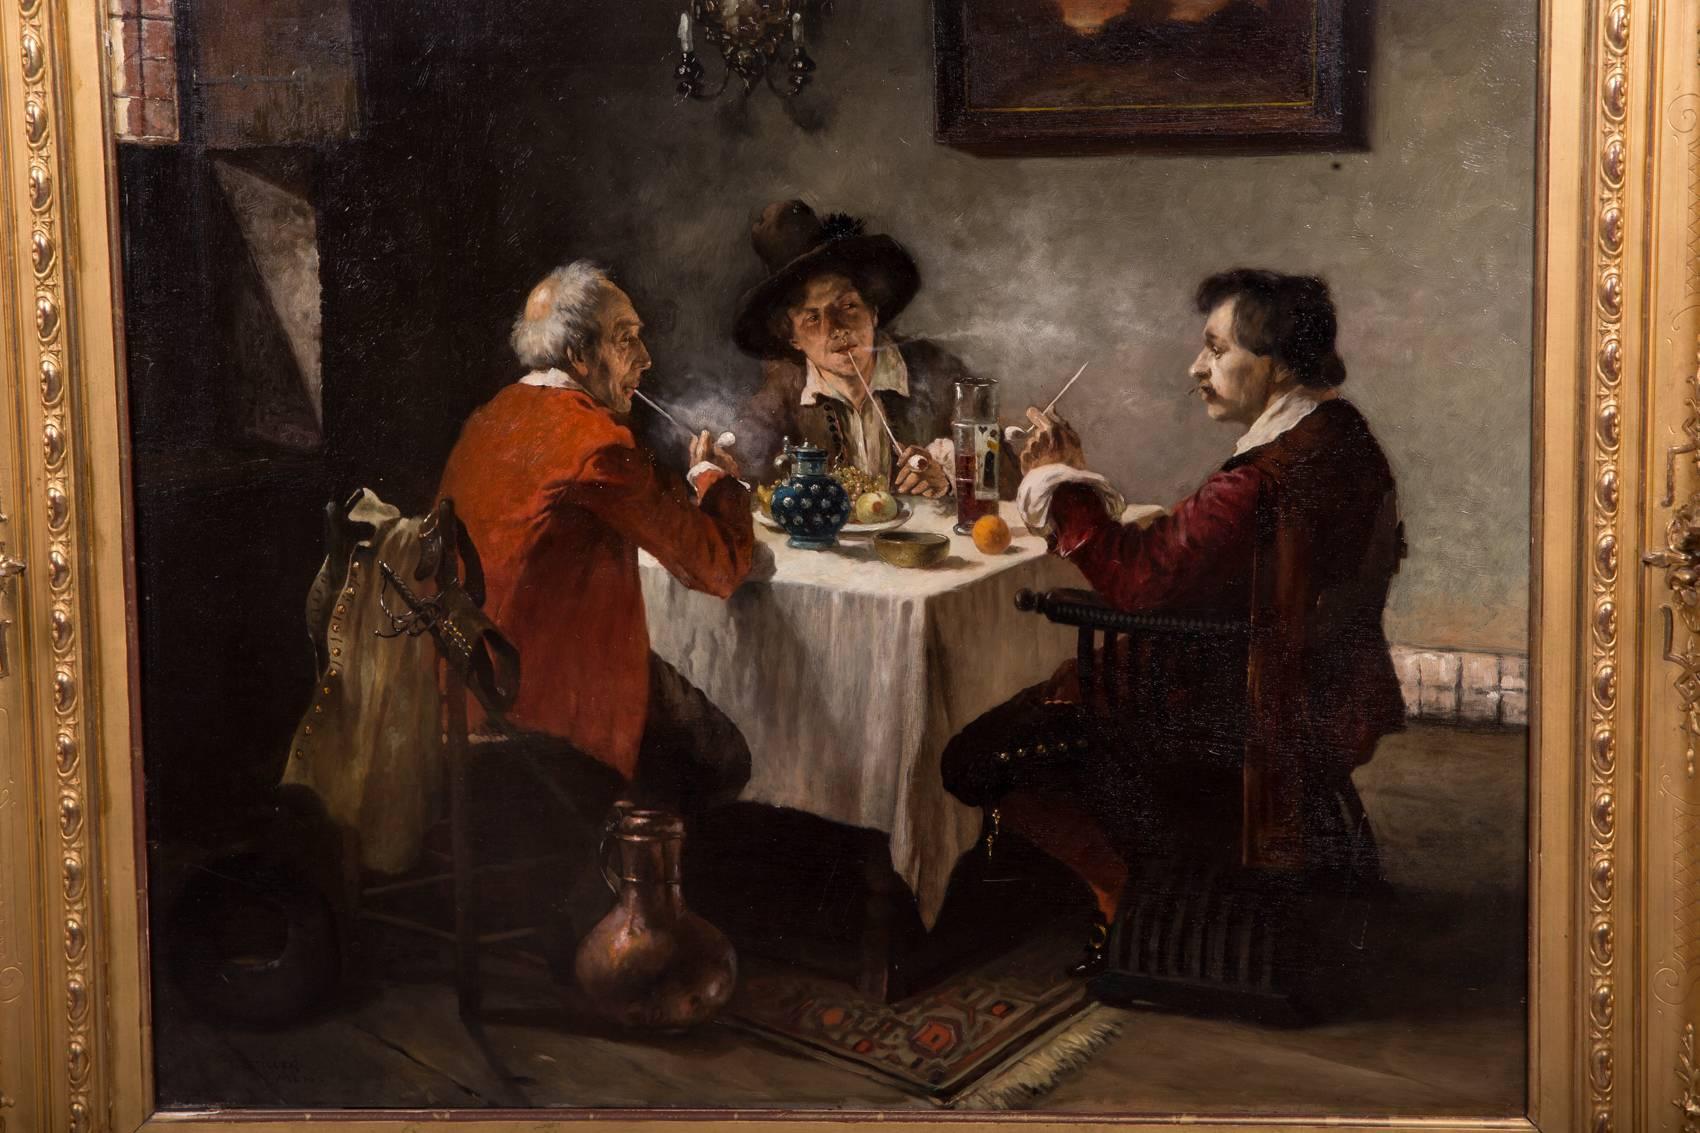 Oil painting on mahogany plate L. Stiller/painting, circa 1880

Oil painted on mahogany. Poliment gold-plated frame. Three gentlemen sitting at the table smoking a pipe. According to previous owners, the painting was paid around DM 6,000 in a